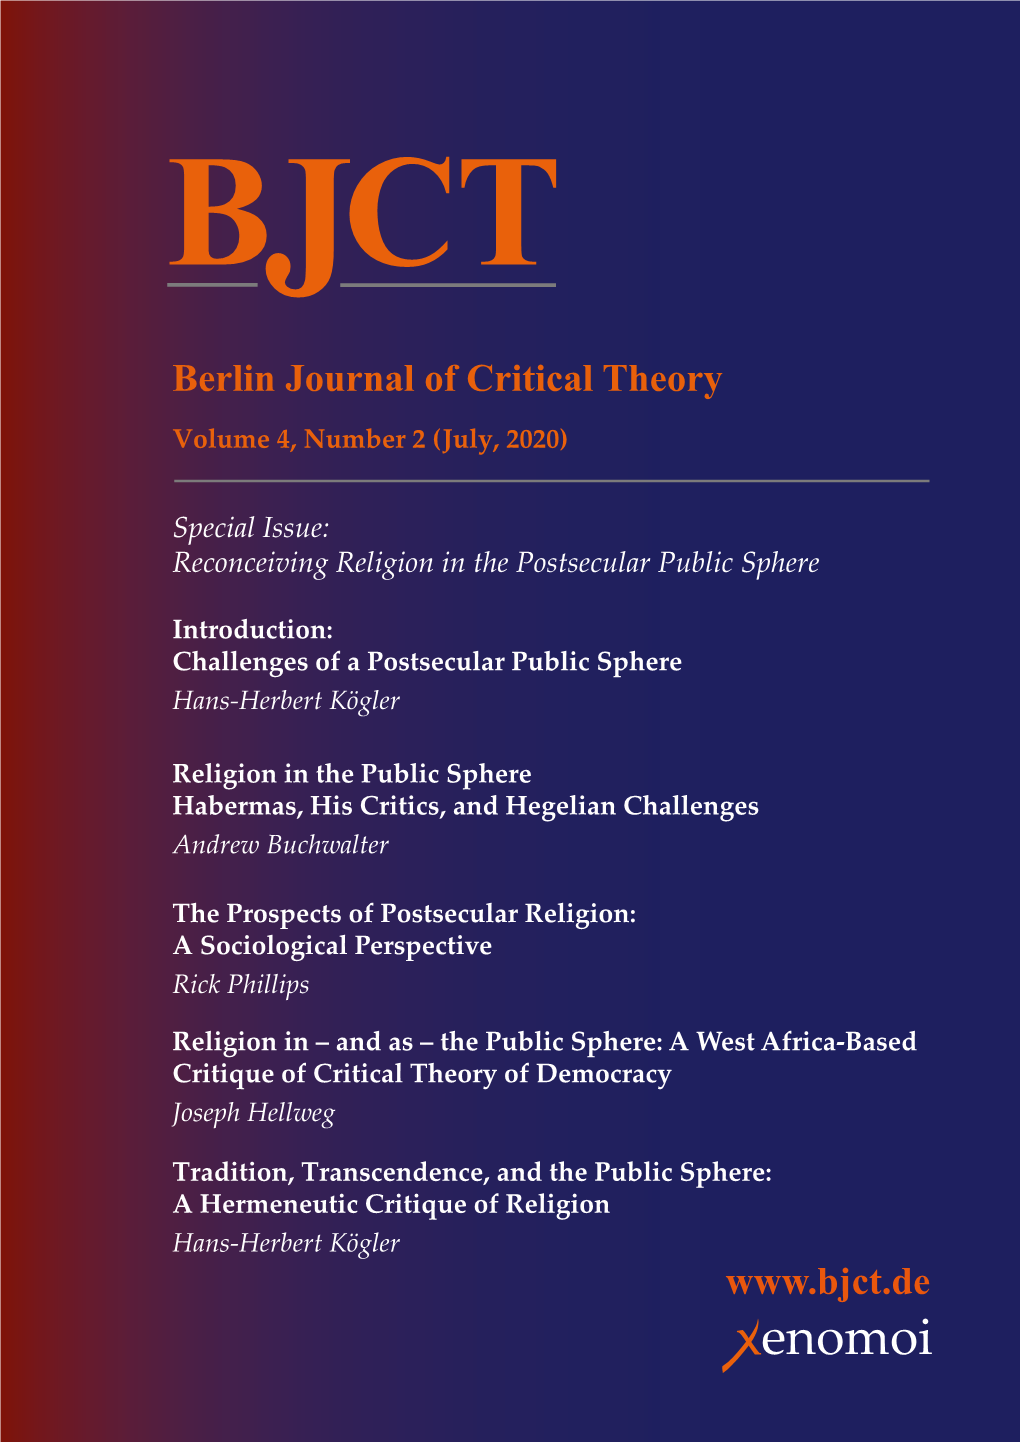 Reconceiving Religion in the Postsecular Public Sphere